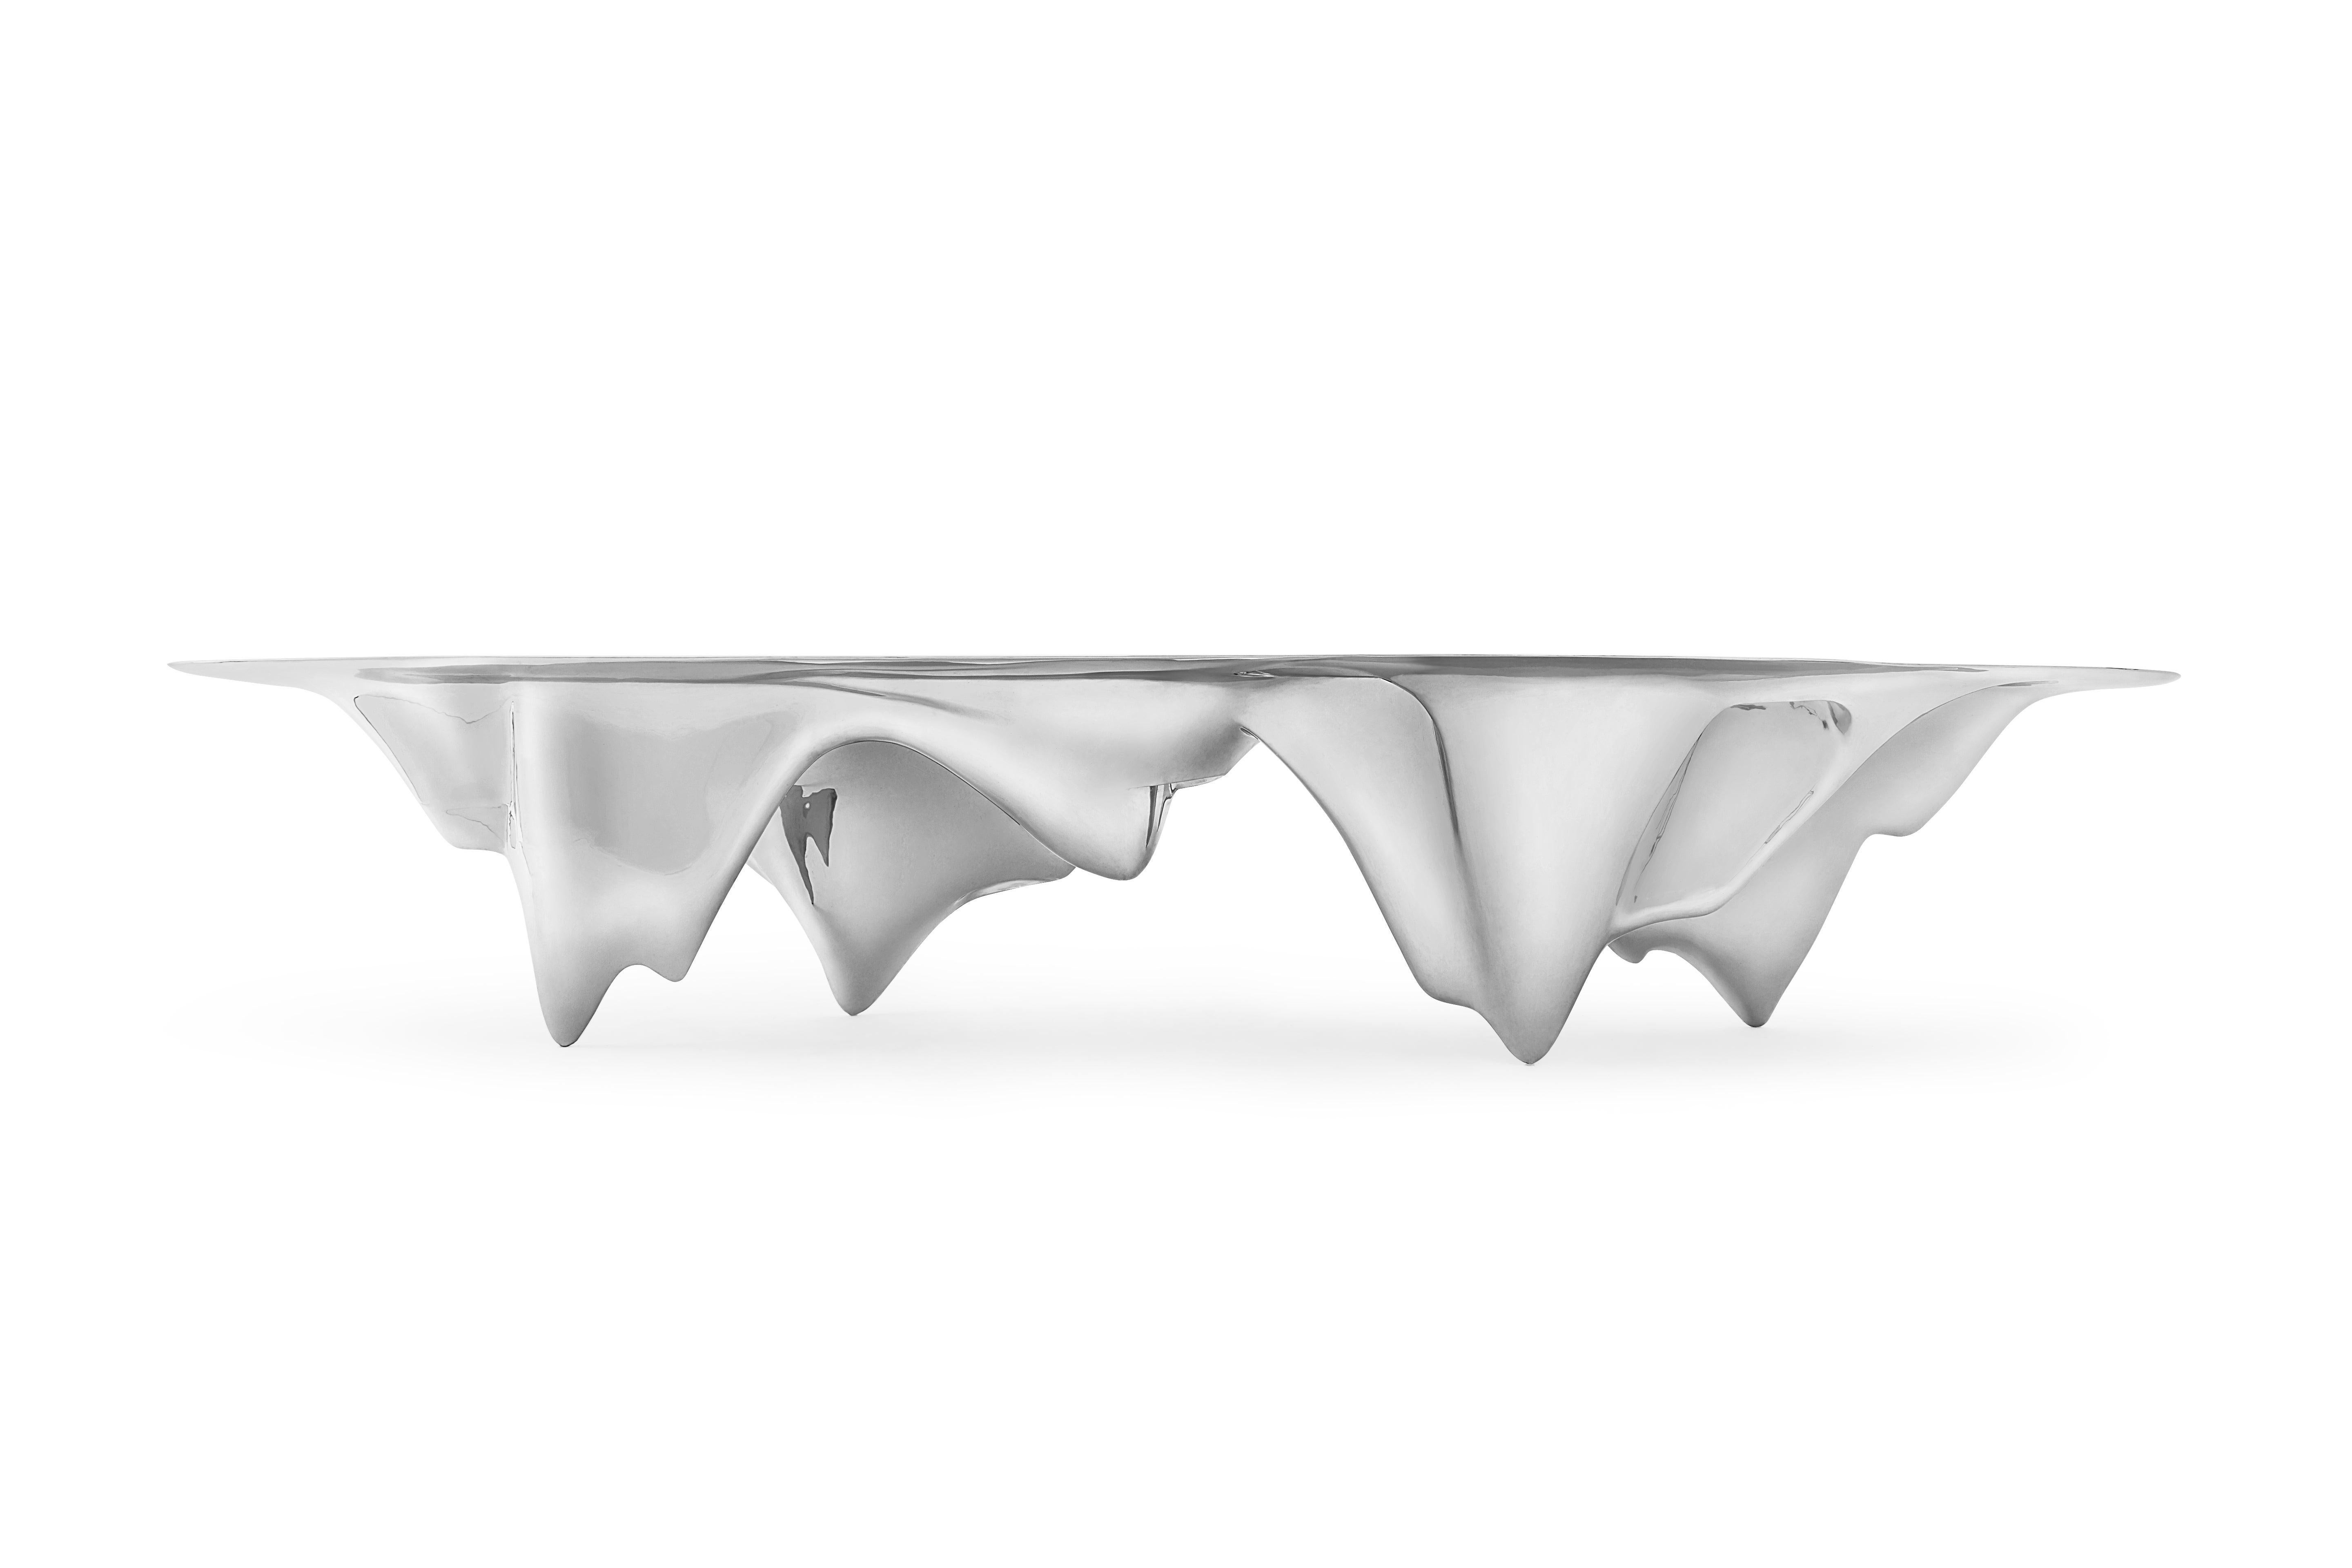 An inverted mountain range the dining table places the peaks of the Martian landscape at the centre of the communal domestic experience of the small colony. This epically large piece is made from CNC’d aluminum, a sophisticated manufacturing process